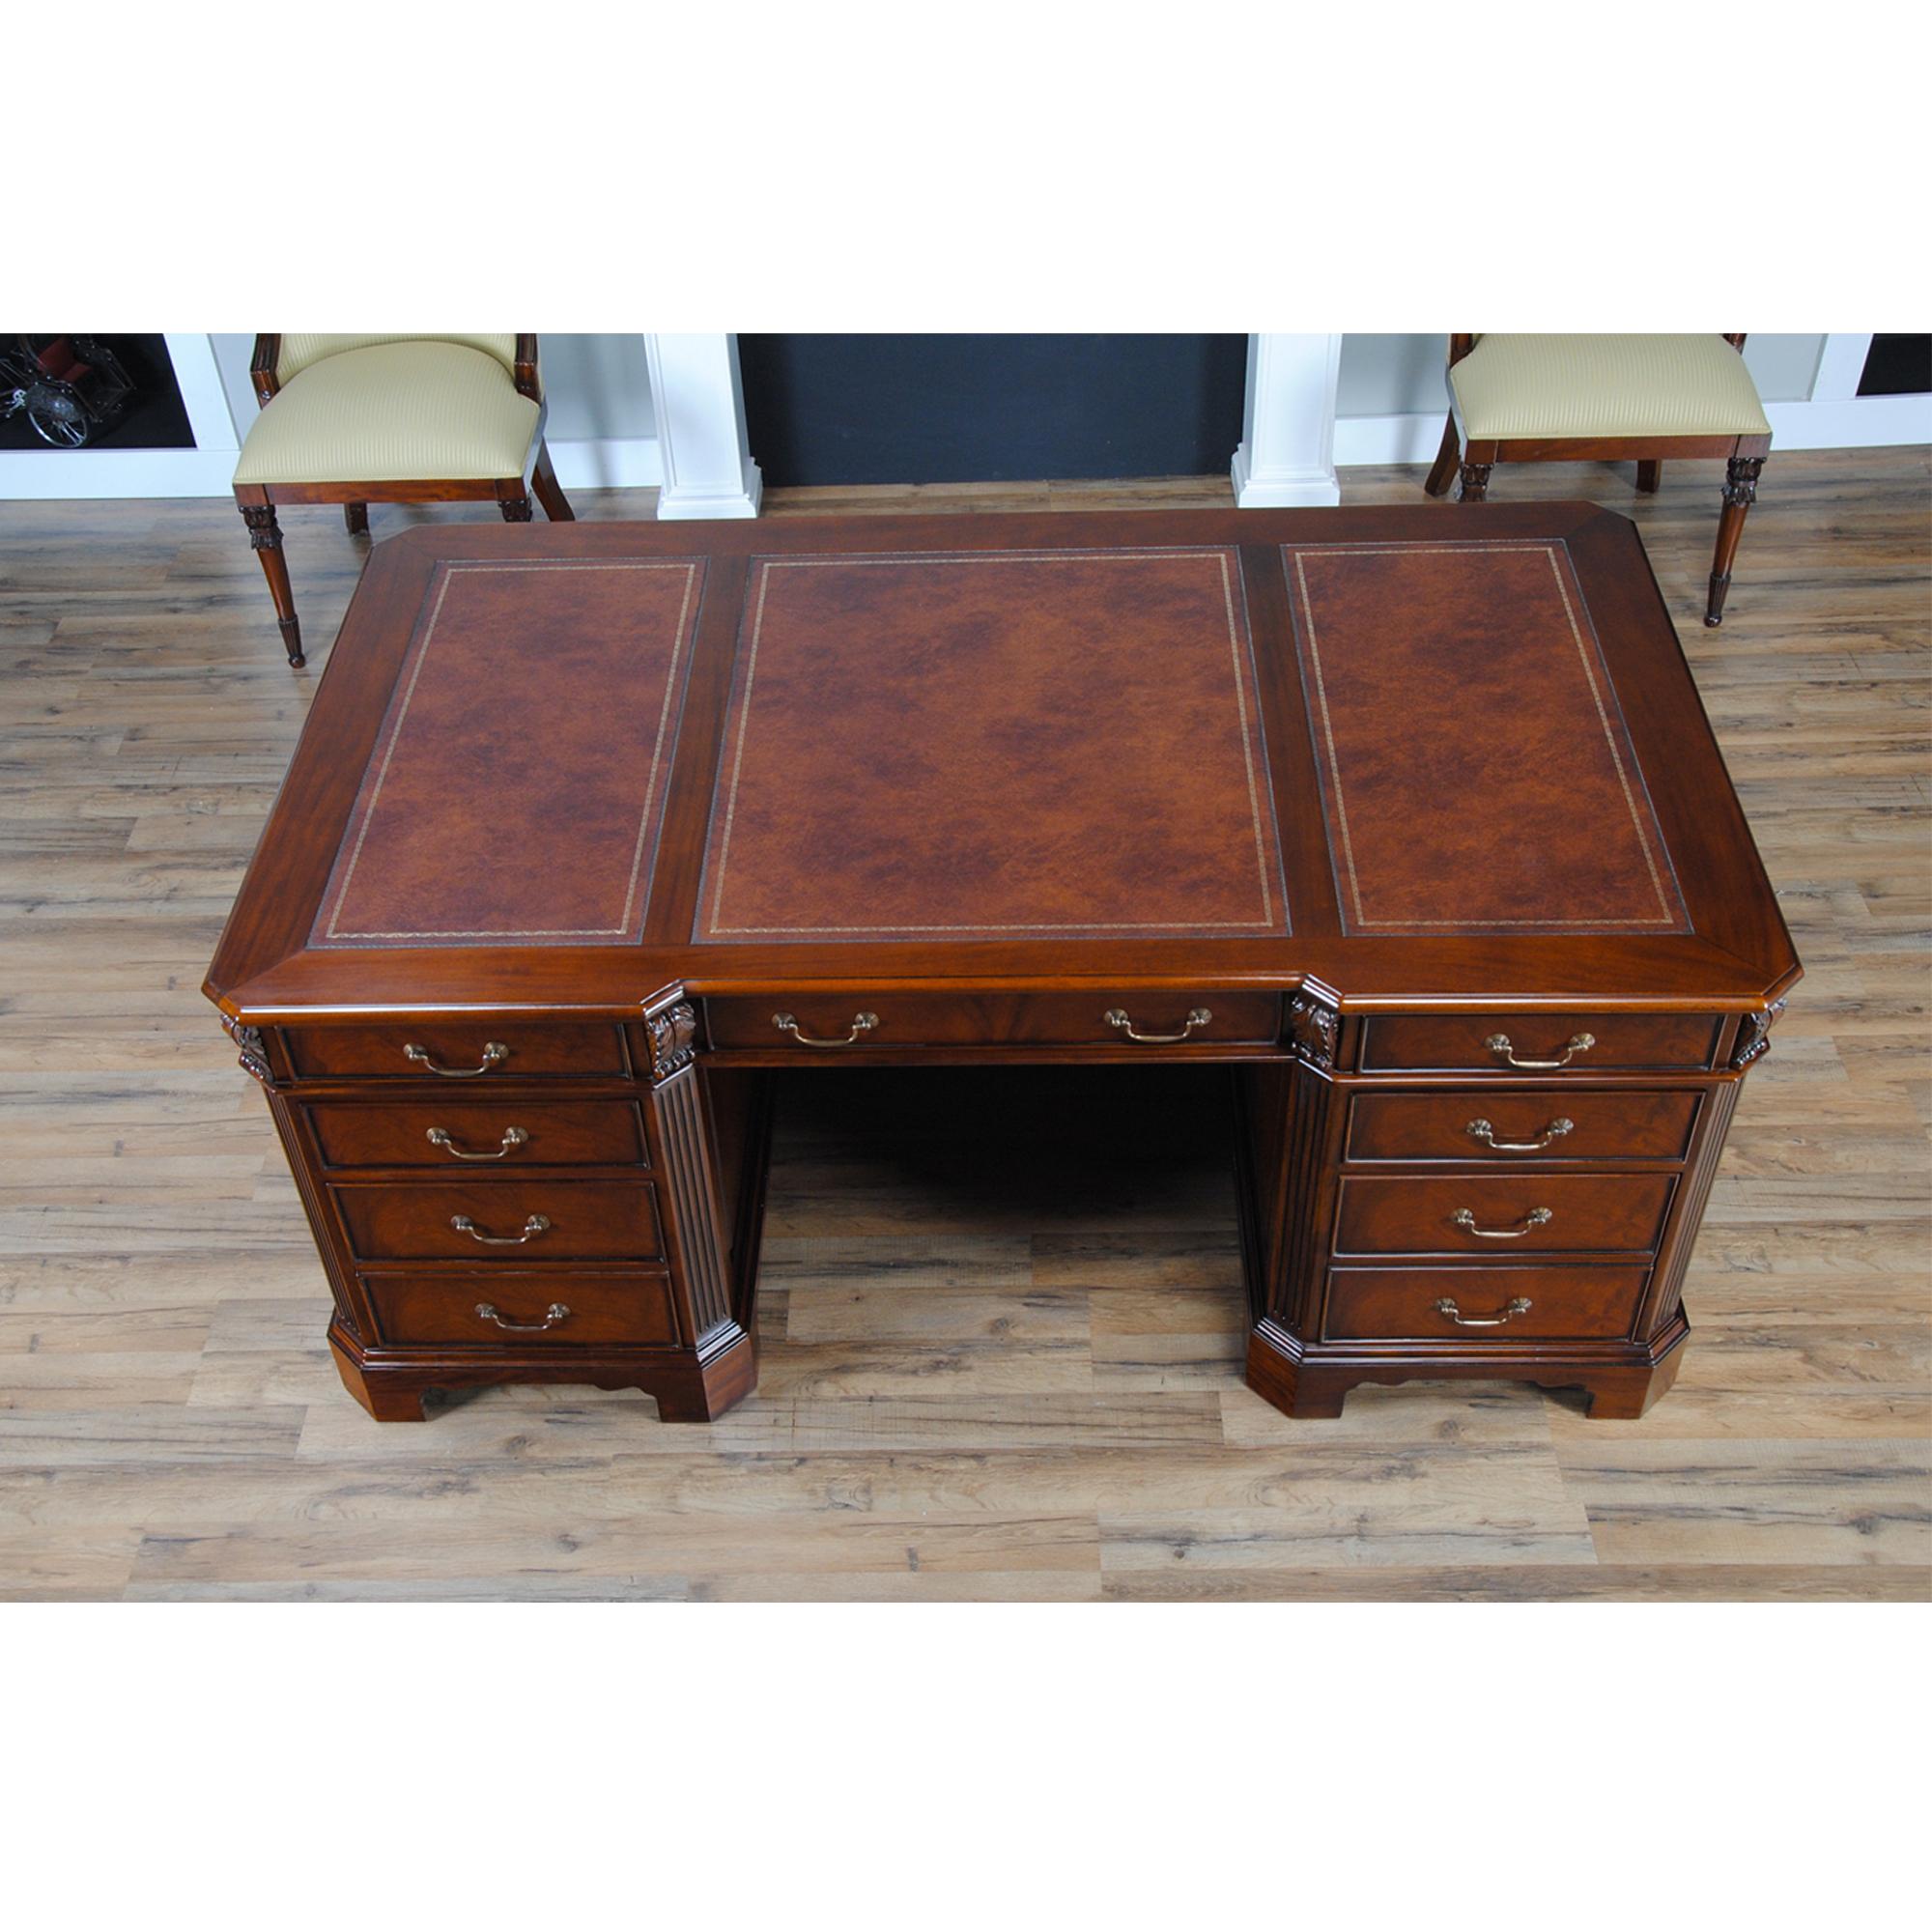 The Penhurst Mahogany Desk in the Niagara Furniture collection. This desk matches a number of other pieces which we produce, please see the links below for related products. The fantastic solid mahogany top frame is inset with three genuine, full